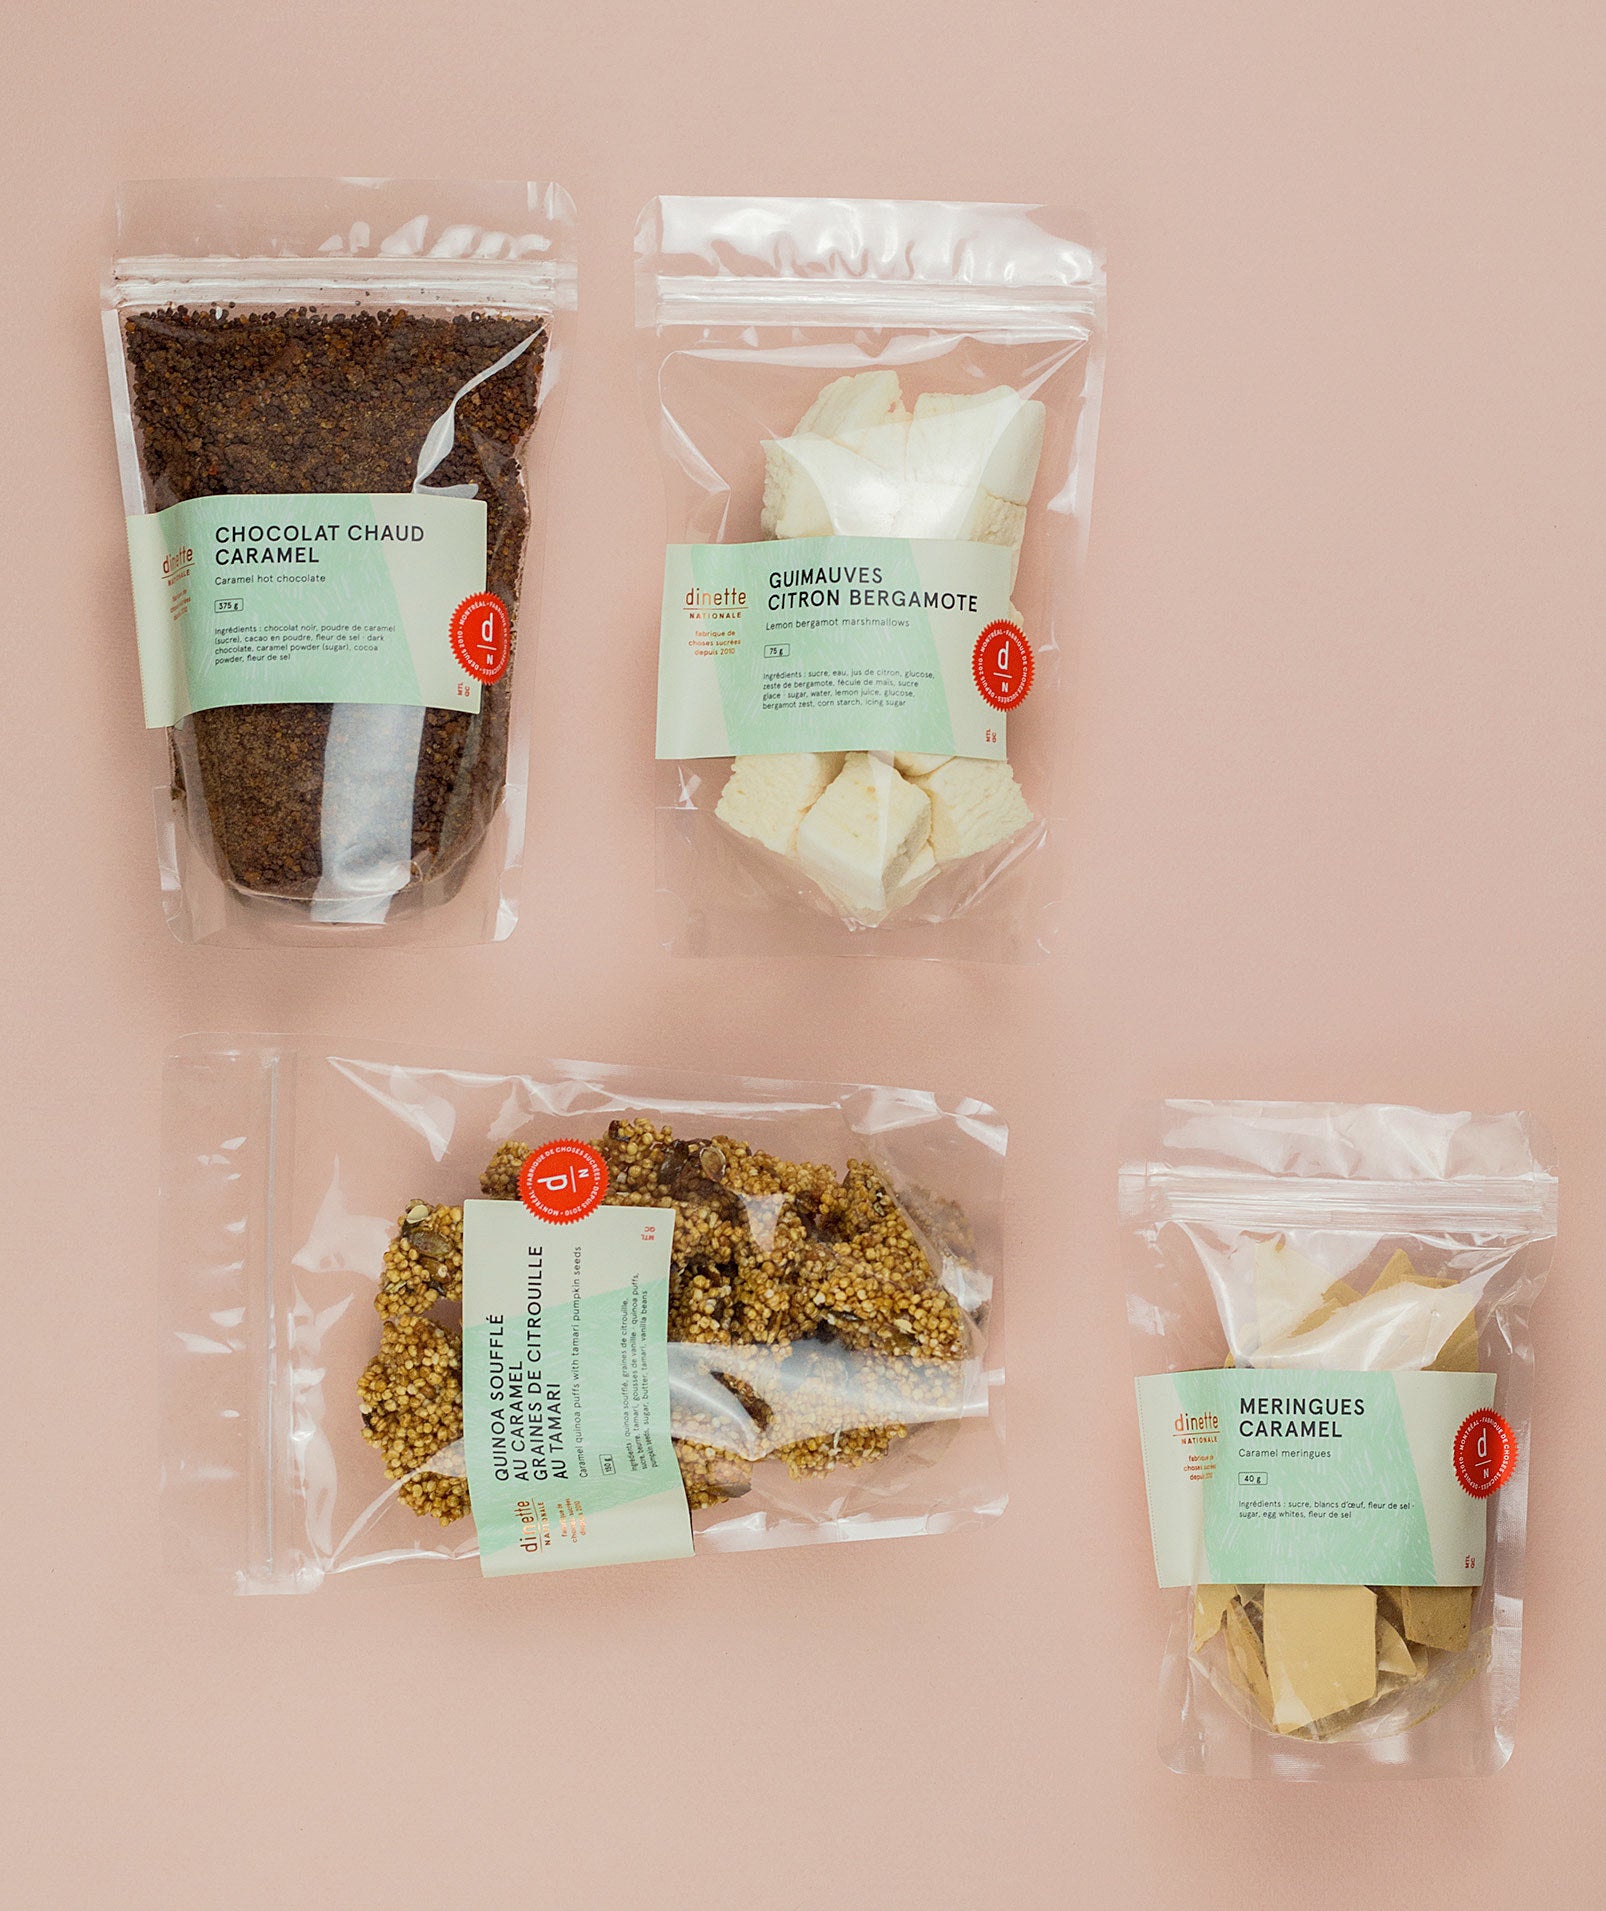 a pack of four snack bags arranged on a simple backdrop